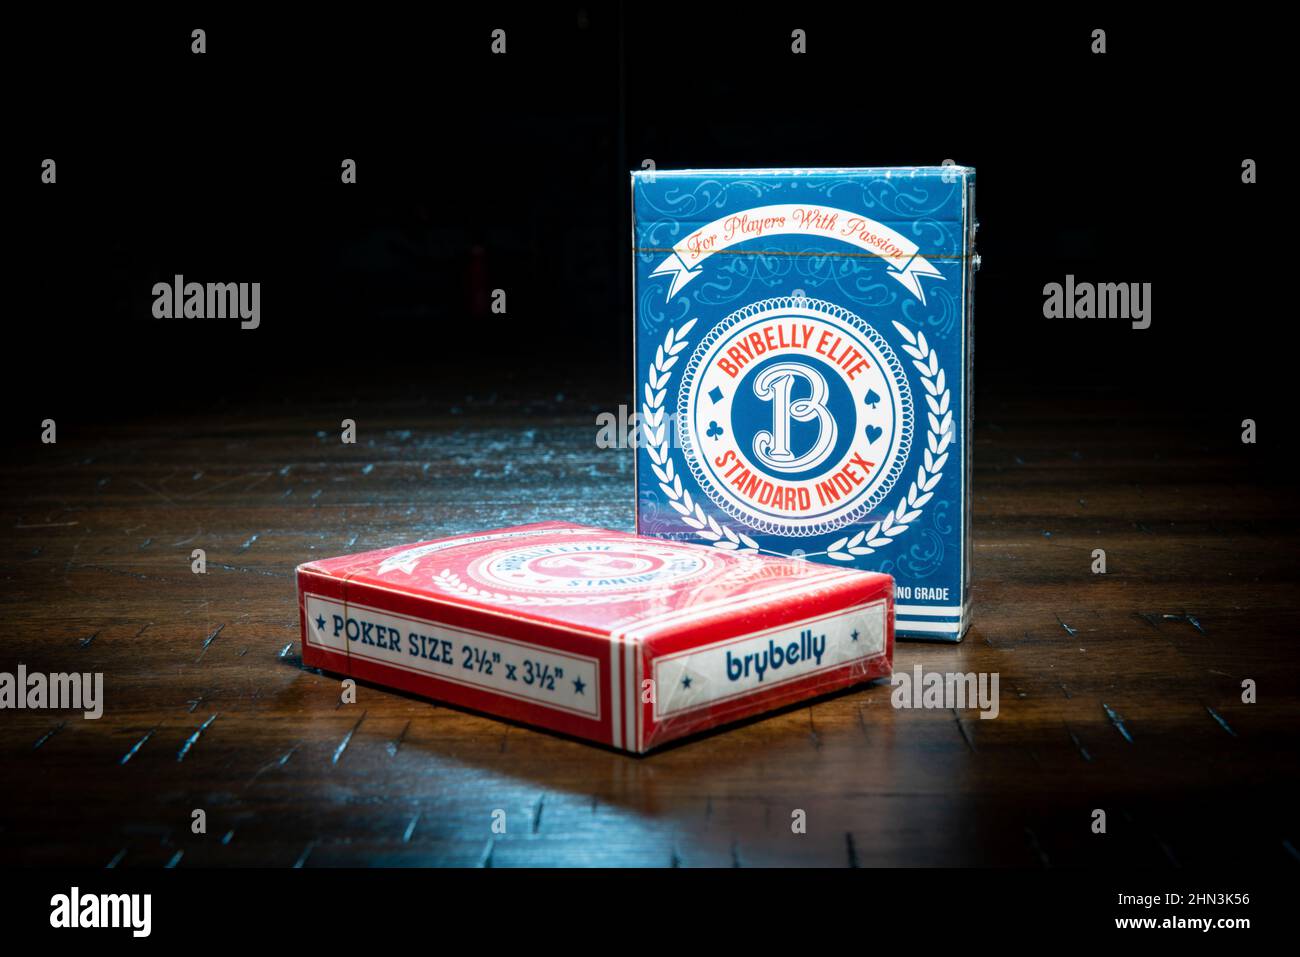 SAINT CLOUD, MINNESOTA - 11 FEBRUARY, 2022: Two packs of Brybelly Elite playing cards sit on a wooden table. Stock Photo